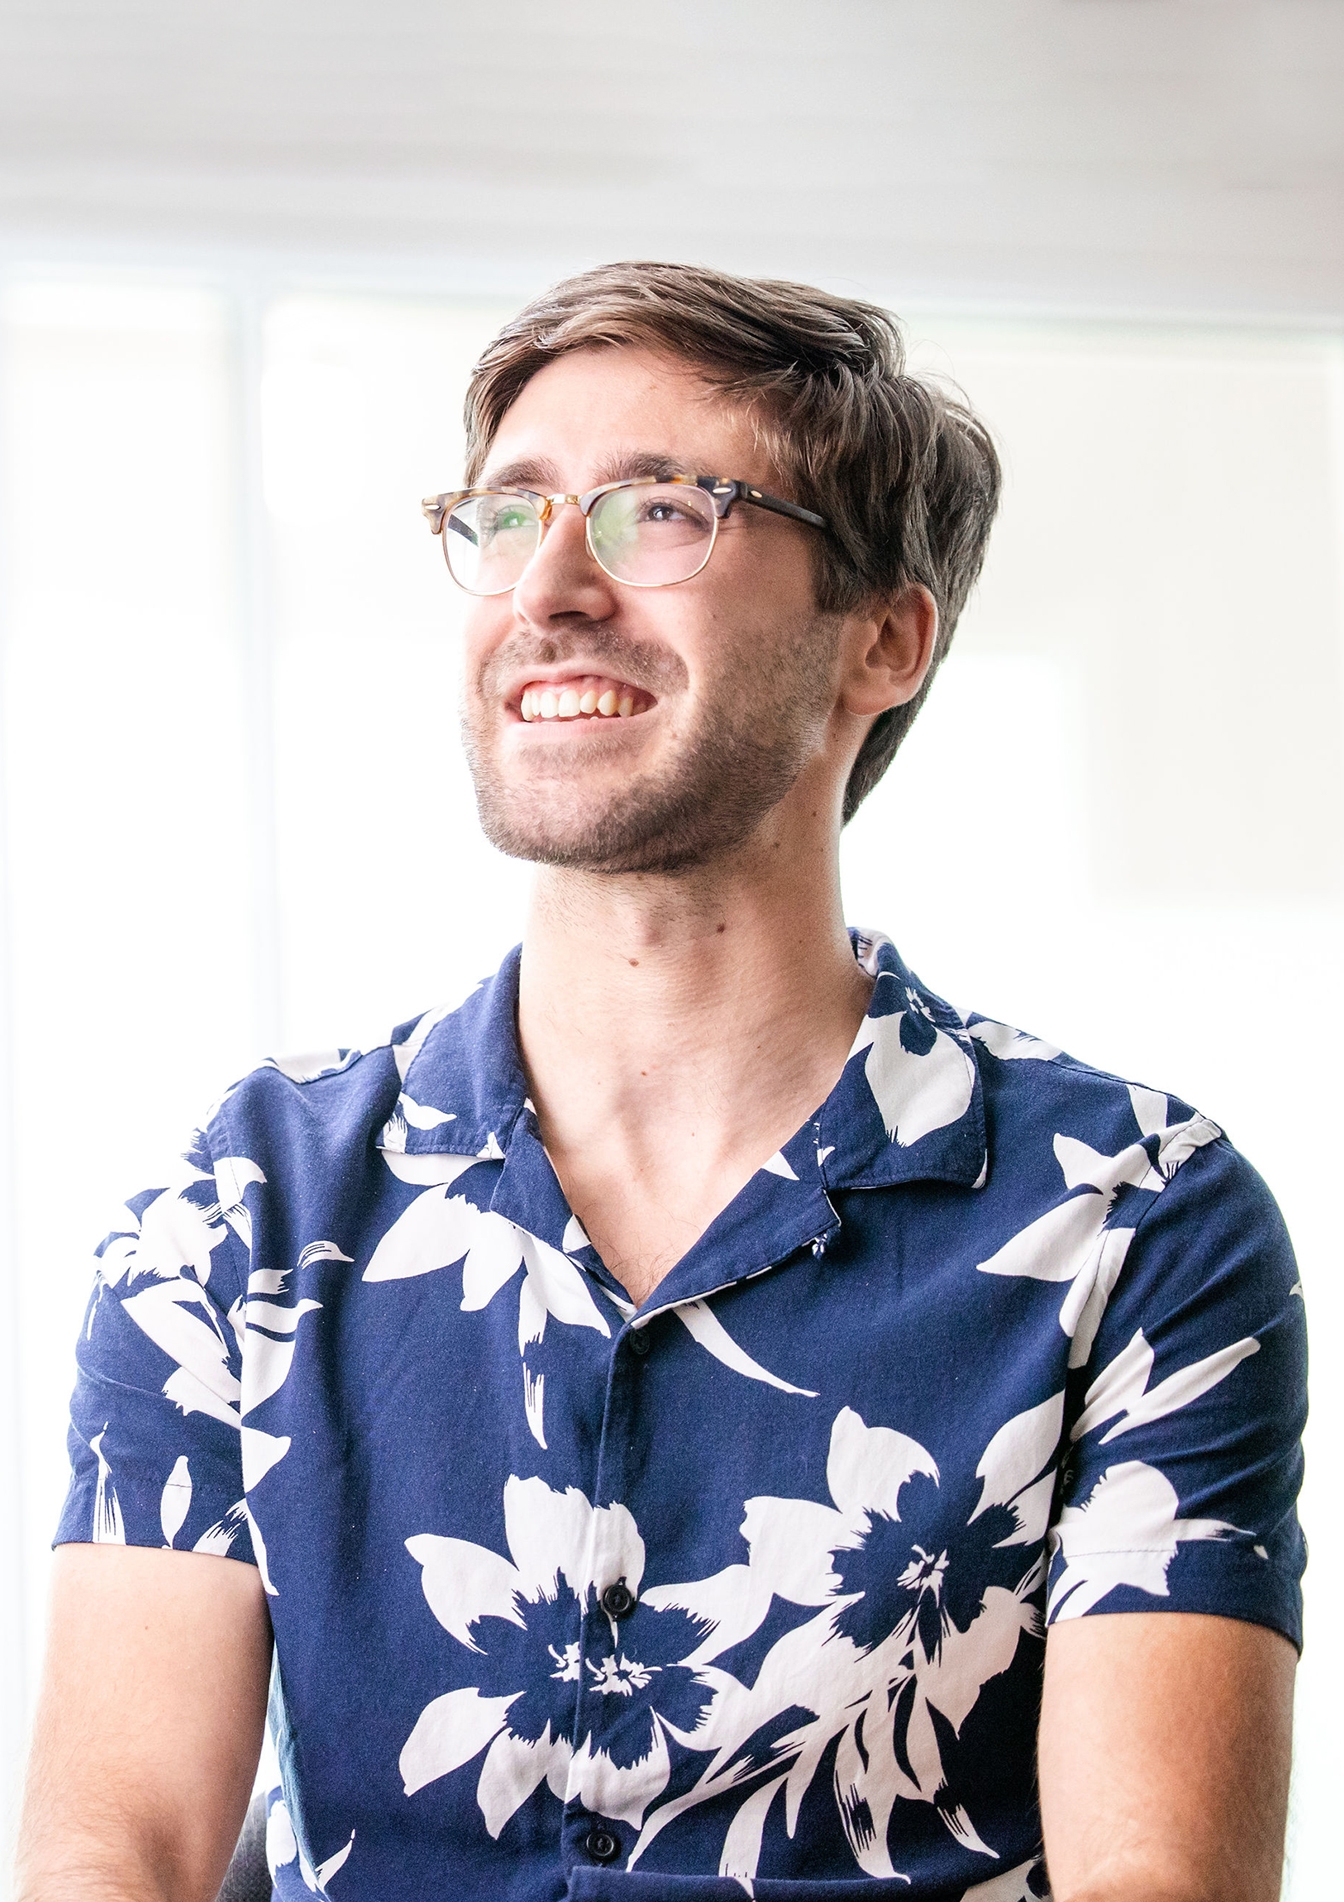 Man with glasses and blue floral pattern shirt looks off camera